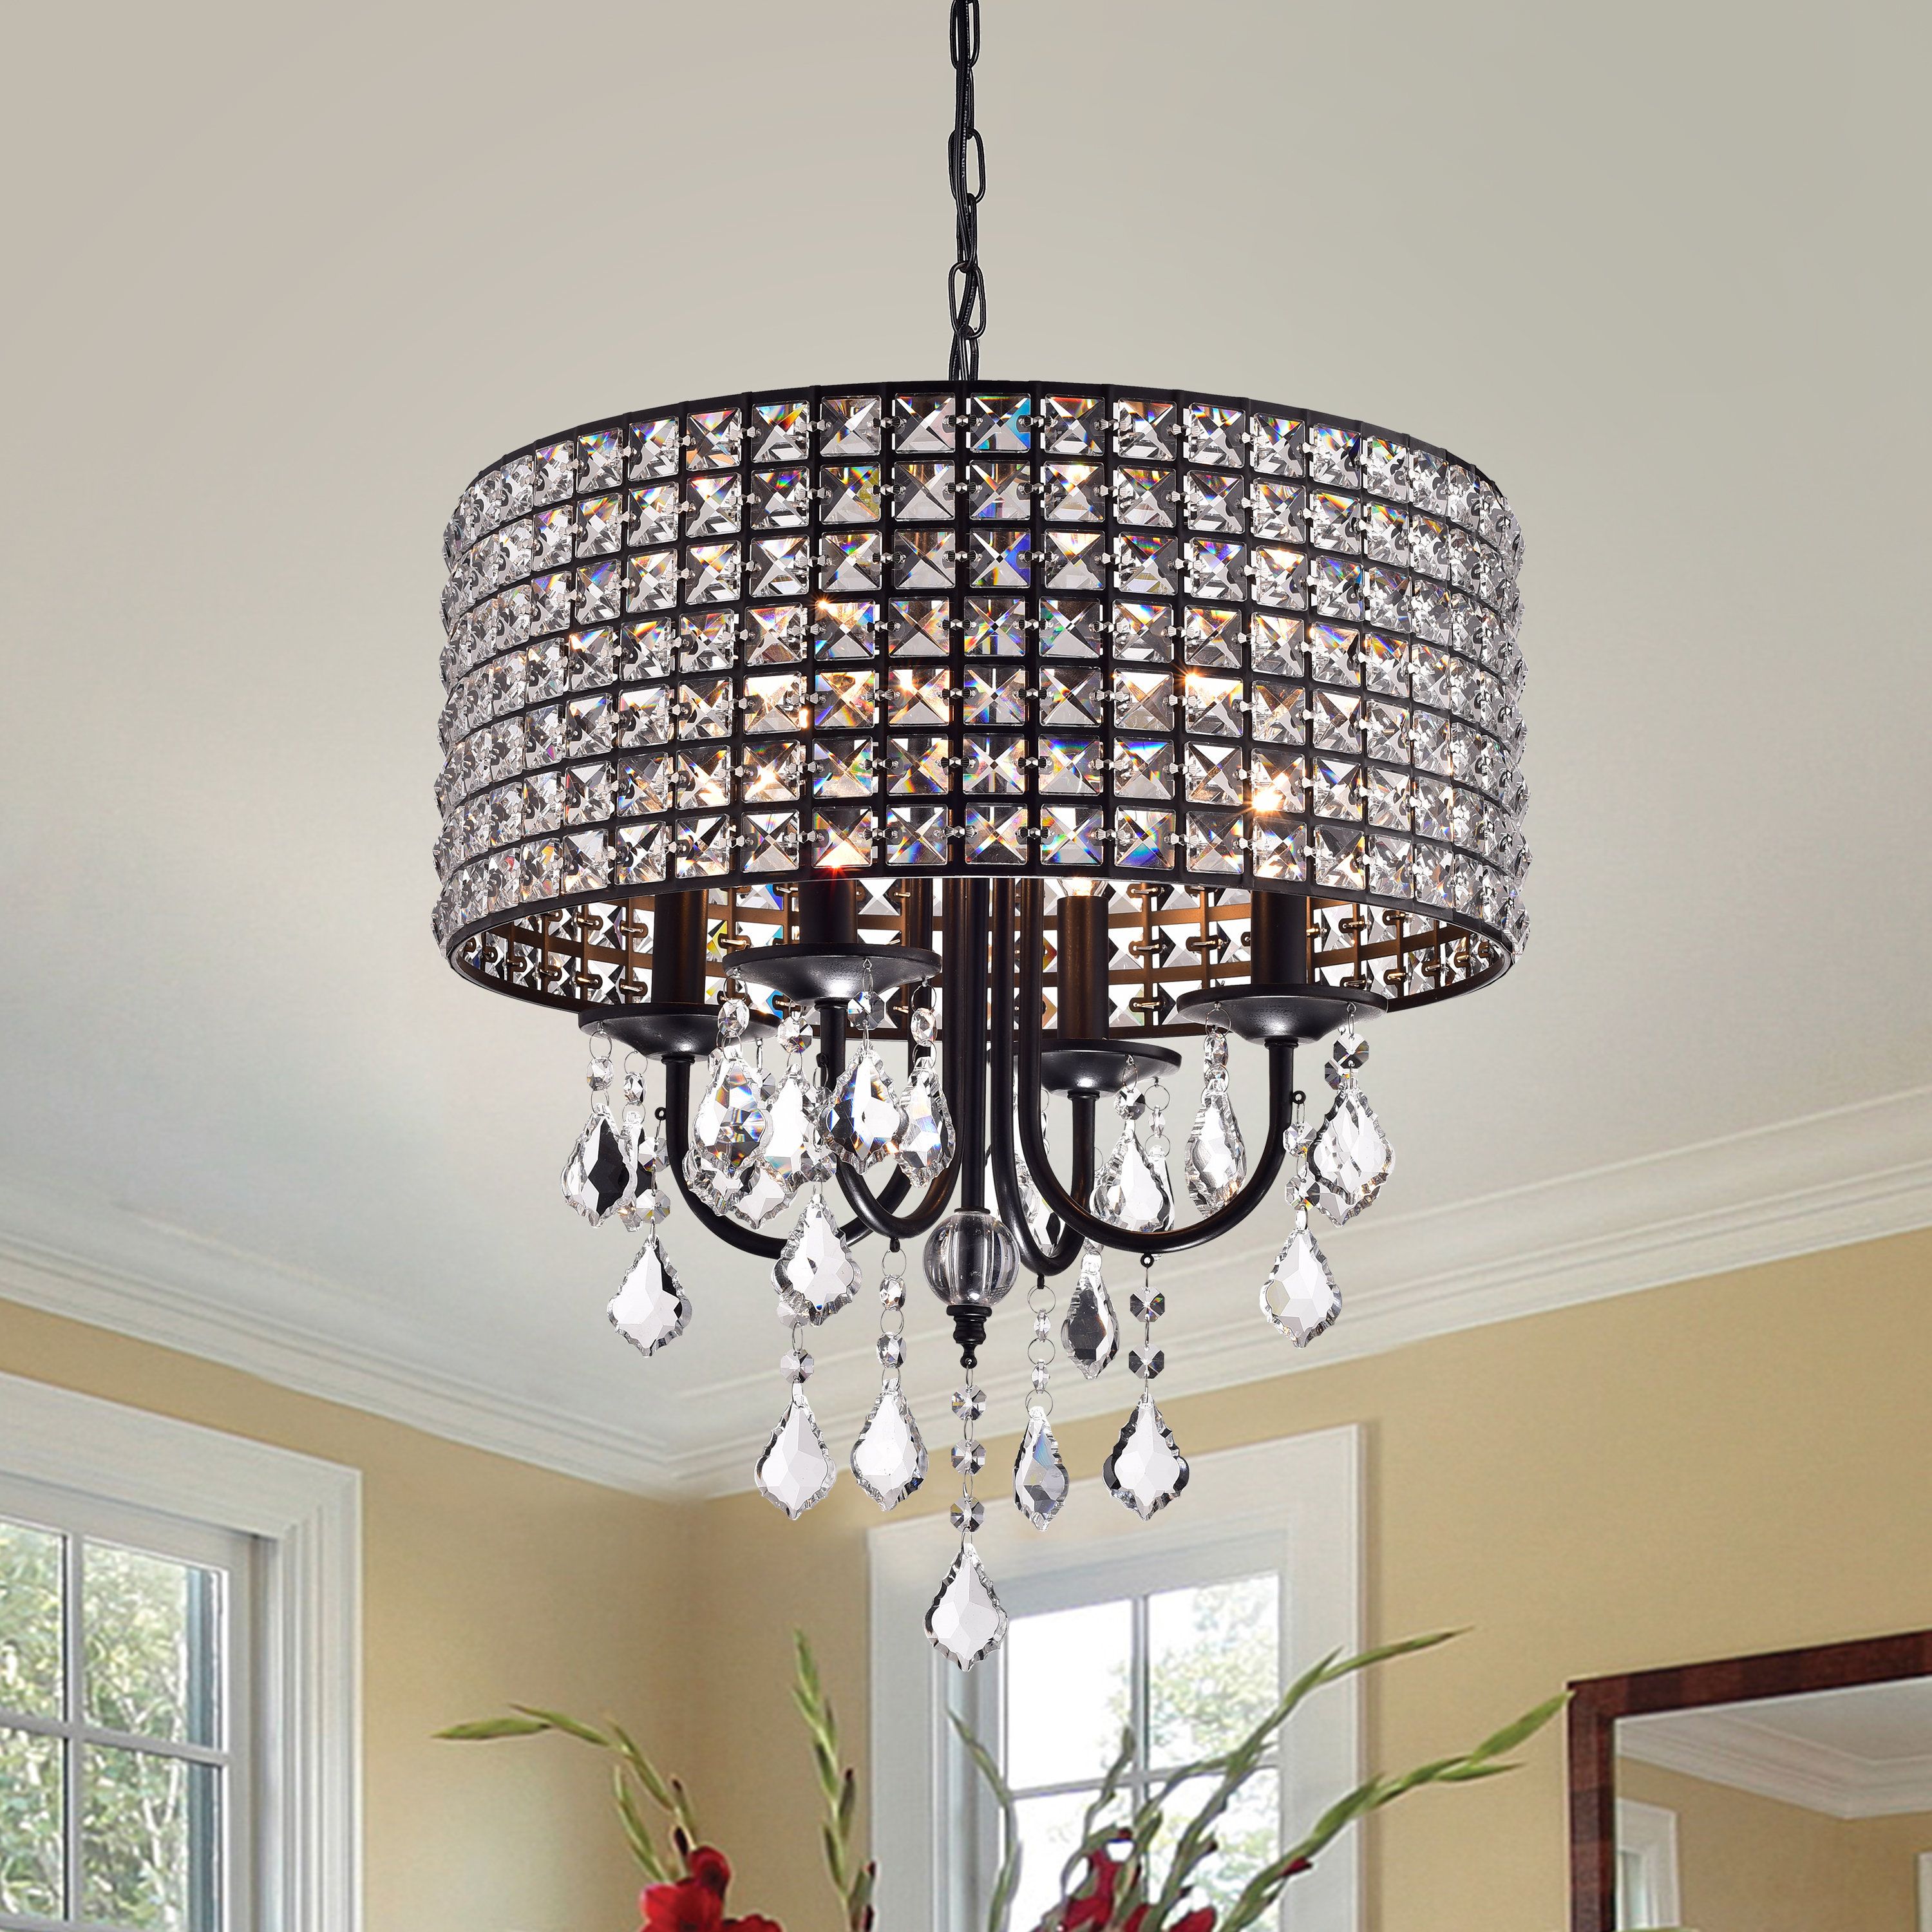 Jill 4 Light Drum Chandeliers For Most Up To Date Albano 4 Light Crystal Chandelier (View 13 of 25)